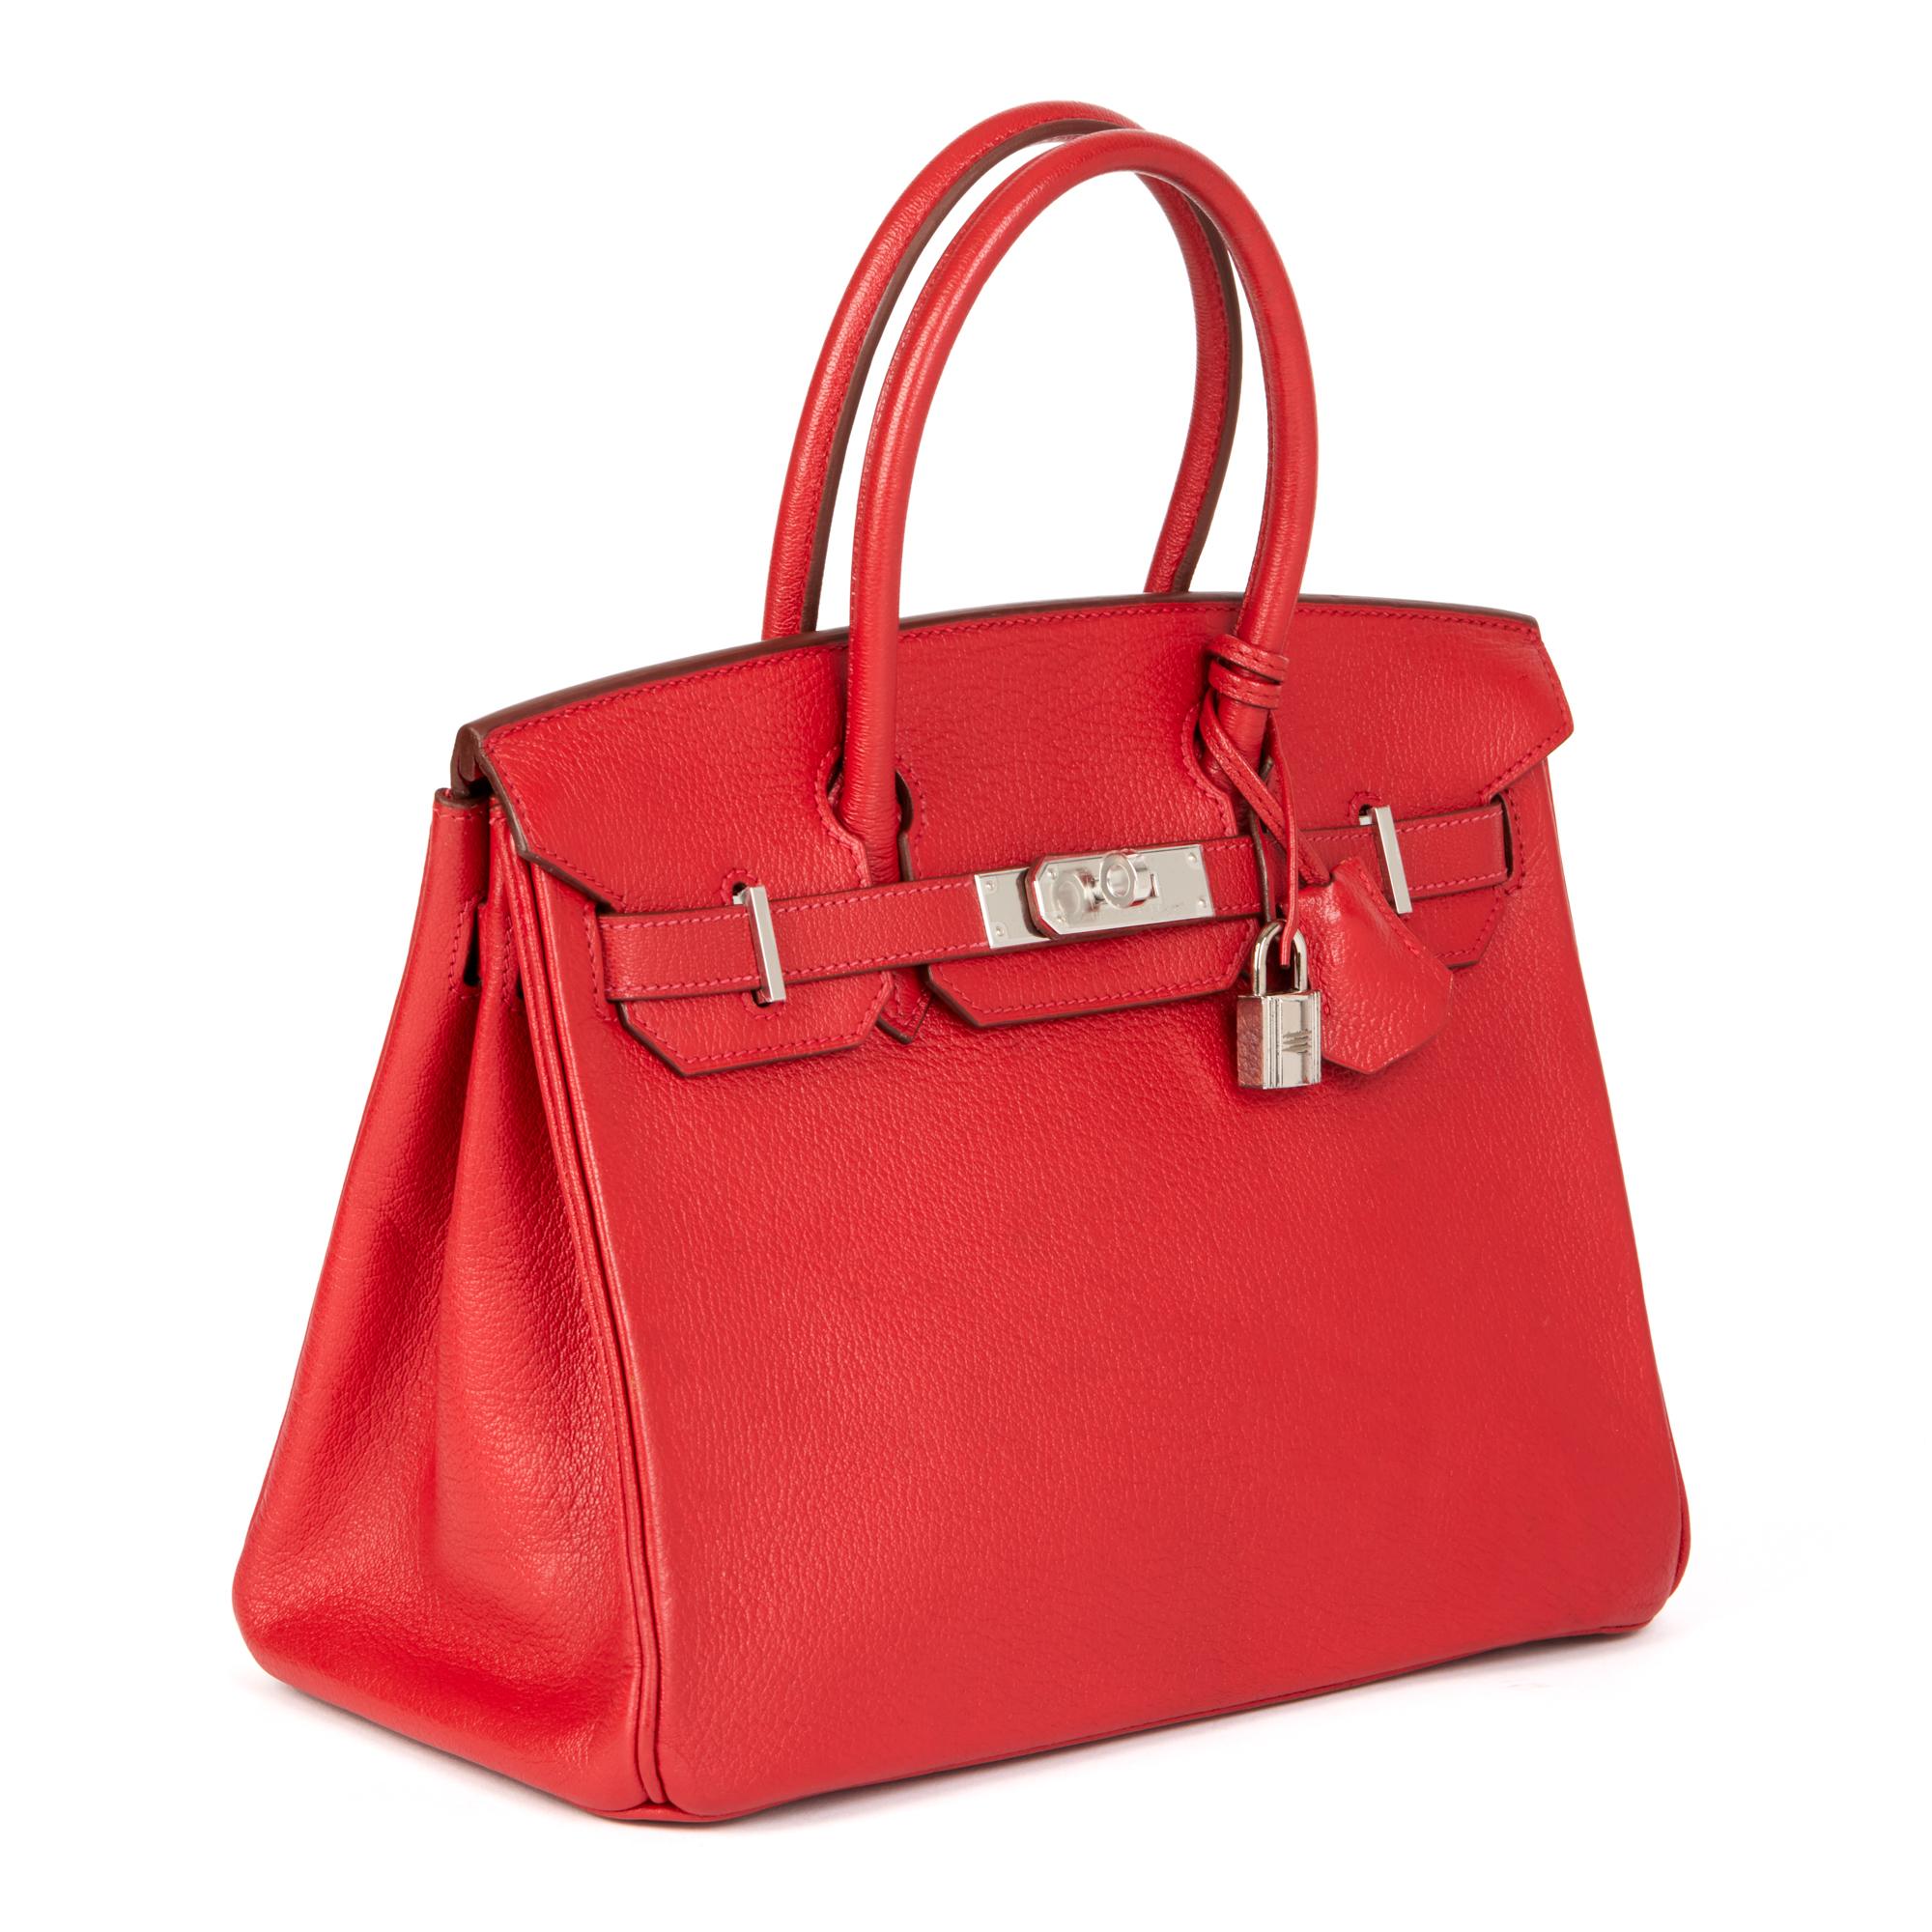 Hermès ROUGE CASAQUE CHEVRE MYSORE LEATHER BIRKIN 30CM RETOURNE

CONDITION NOTES
The exterior is in excellent condition with light signs of use and surface scratches. The leather was cleaned and polished by Hermes in 2022.
The interior is in